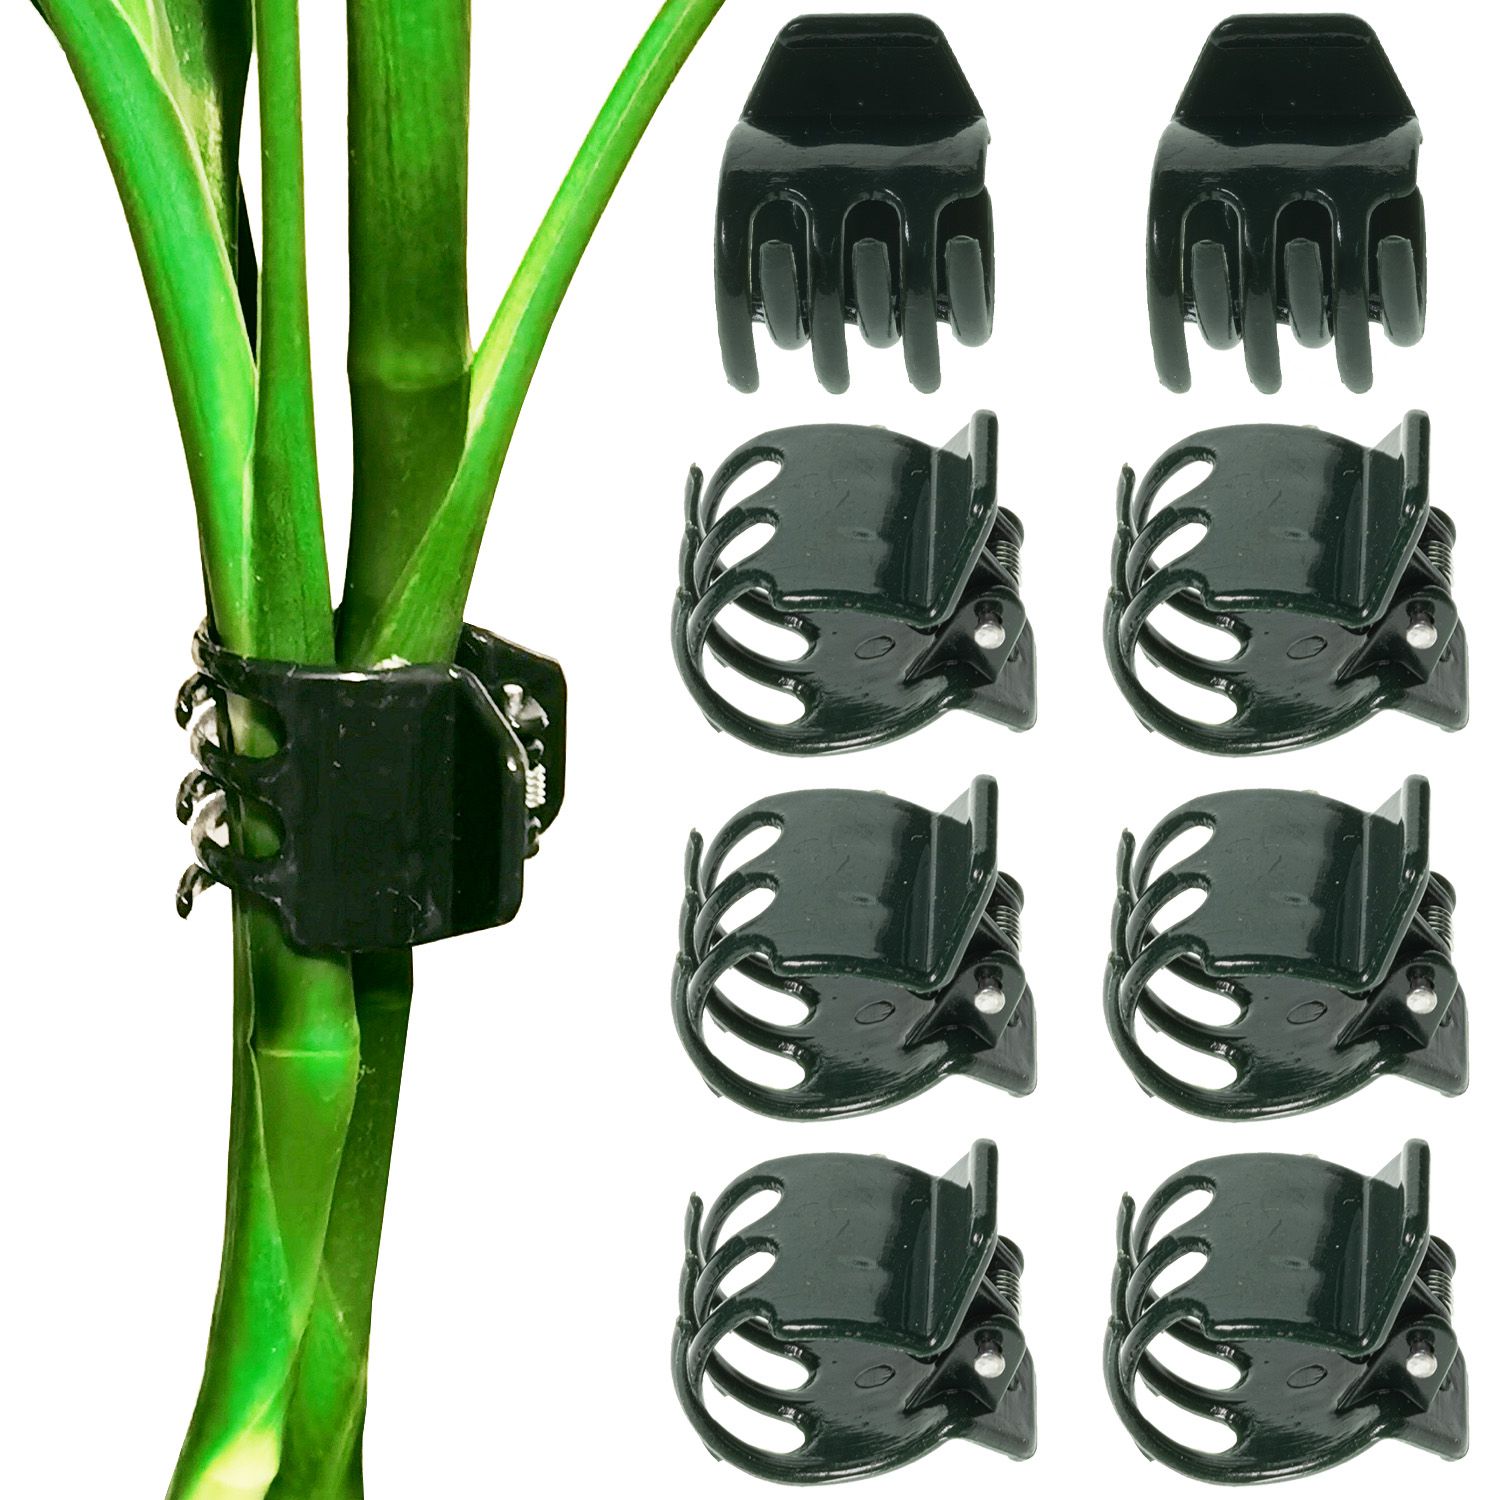 100Pcs Garden Flower Cymbidium Plant Support Clips for Stems,Vines KINGLAKE Orchid Clips 